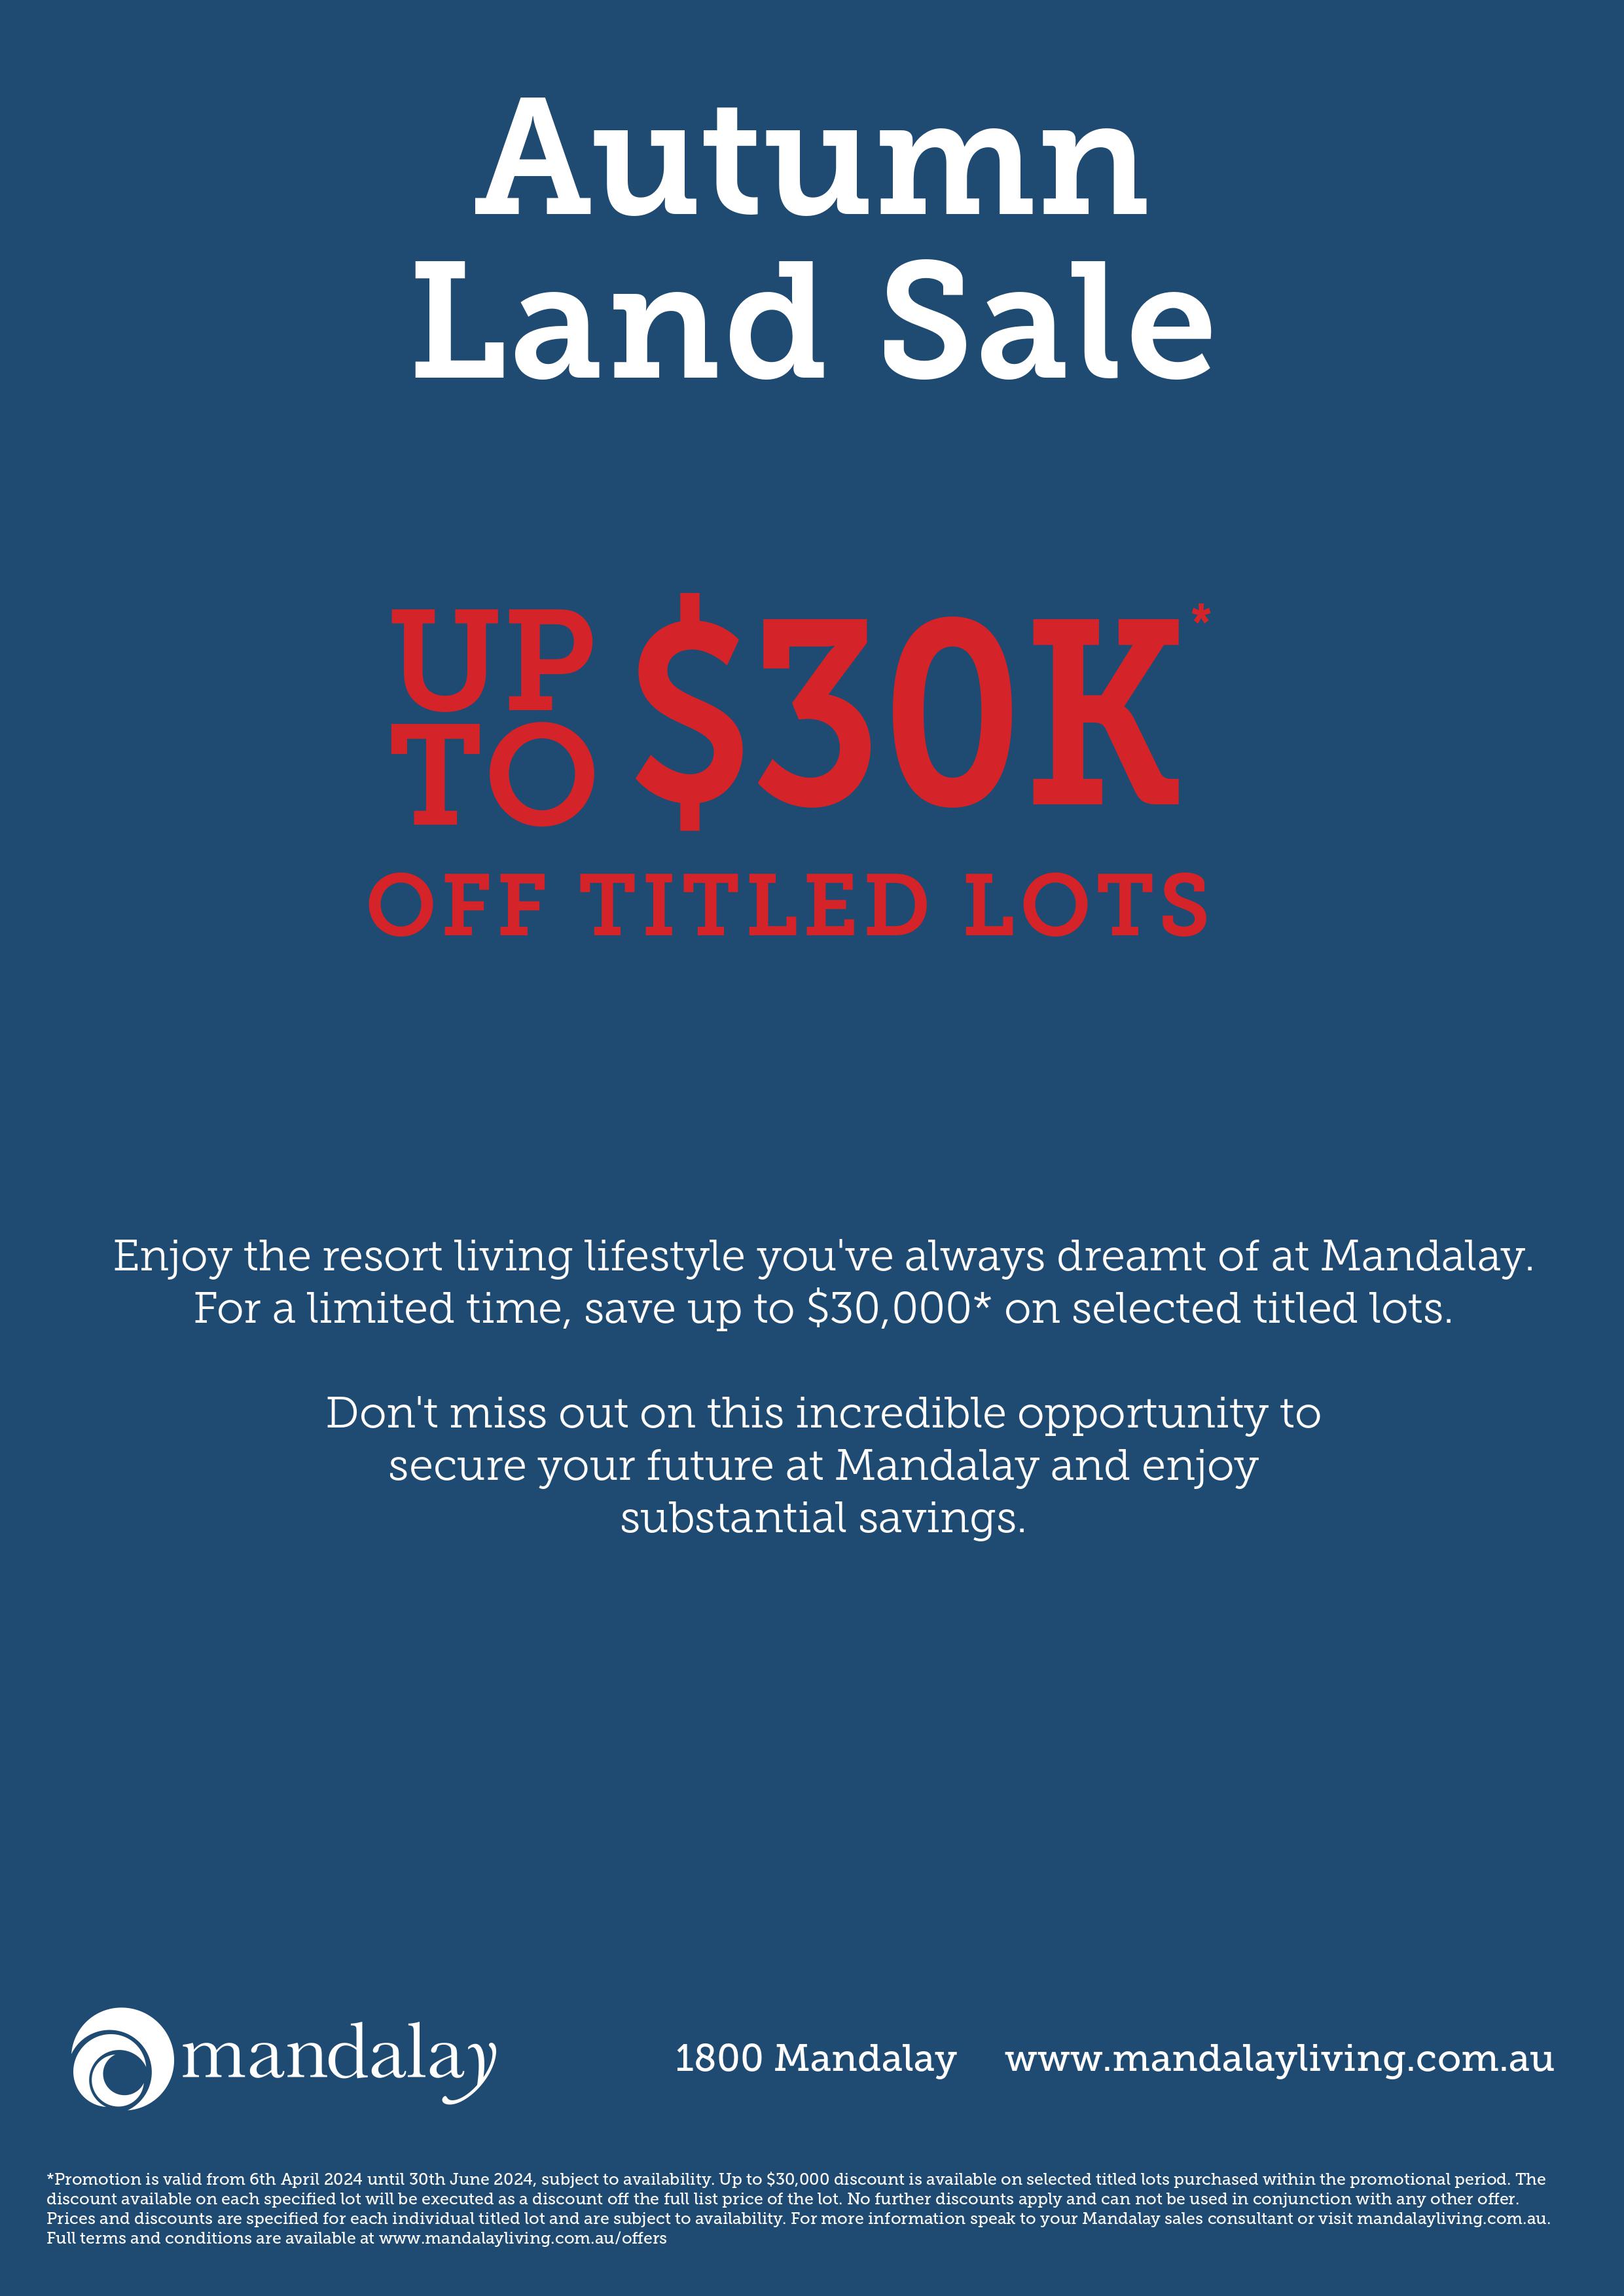 Up to $30K Off Titled Lots